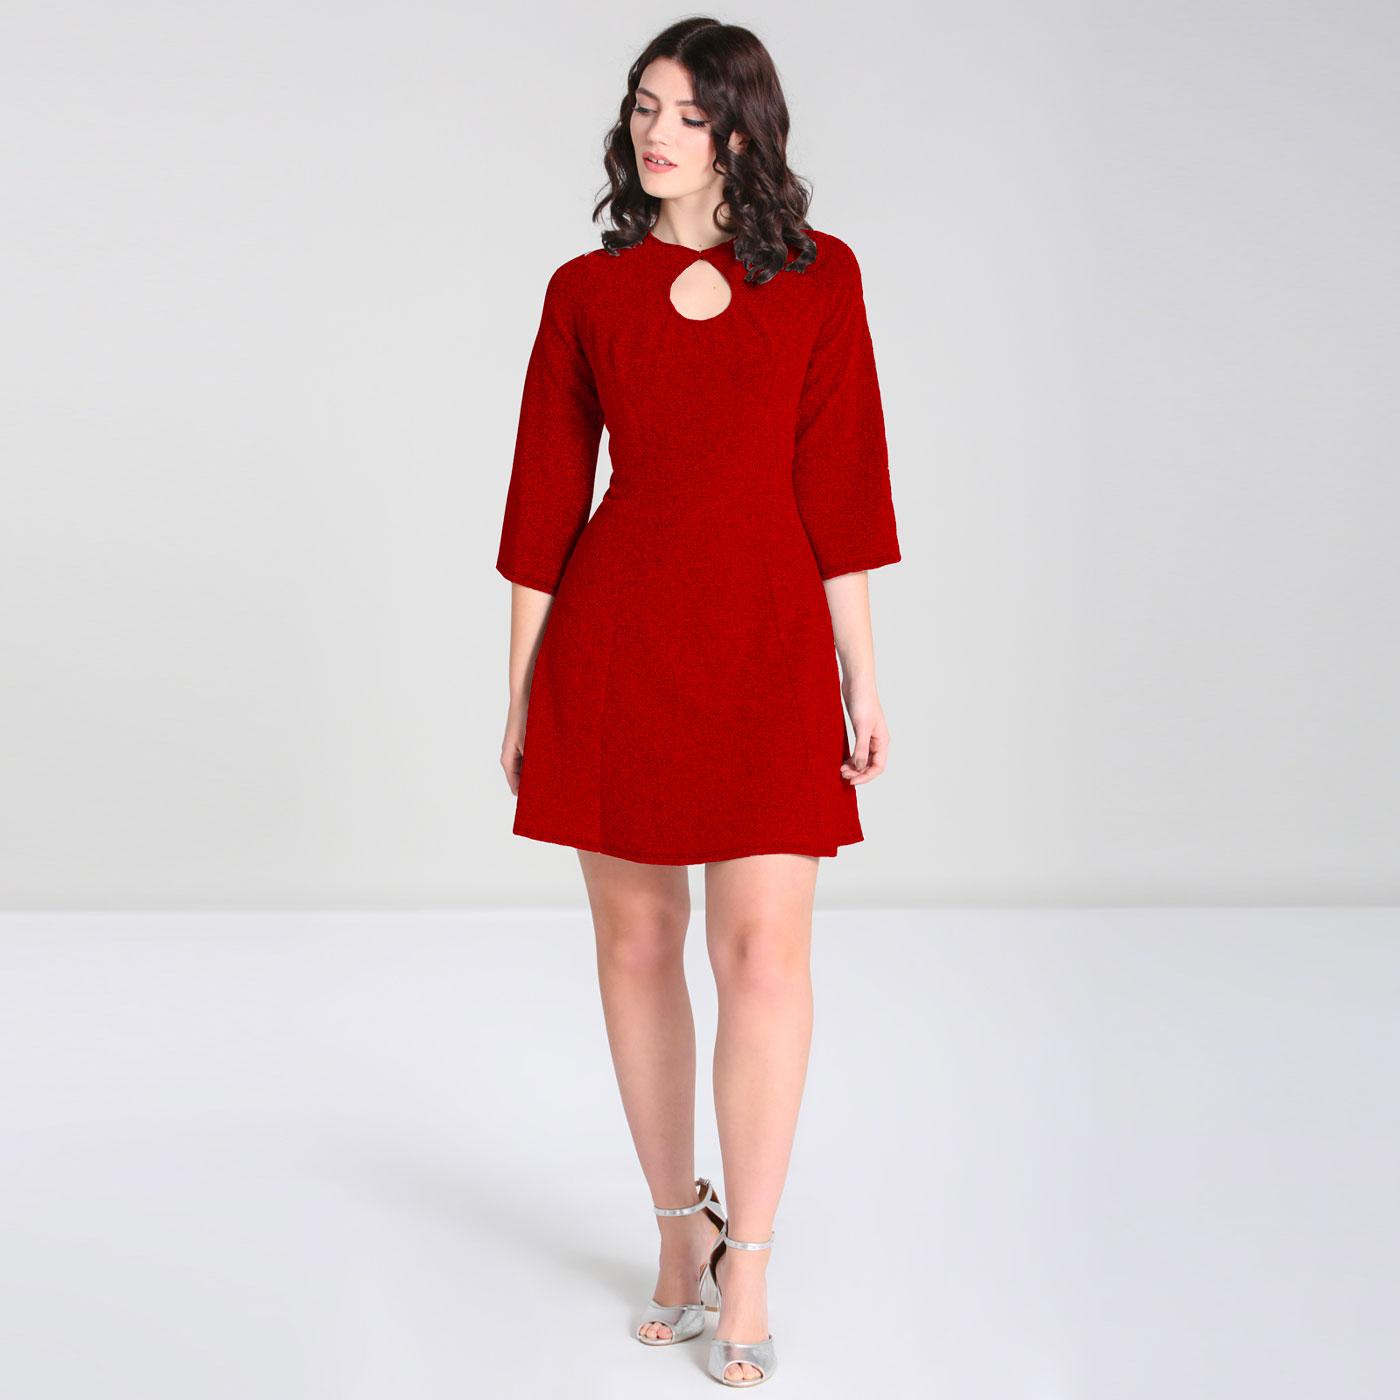 Loco-Motion HELL BUNNY Retro Party Dress in Red